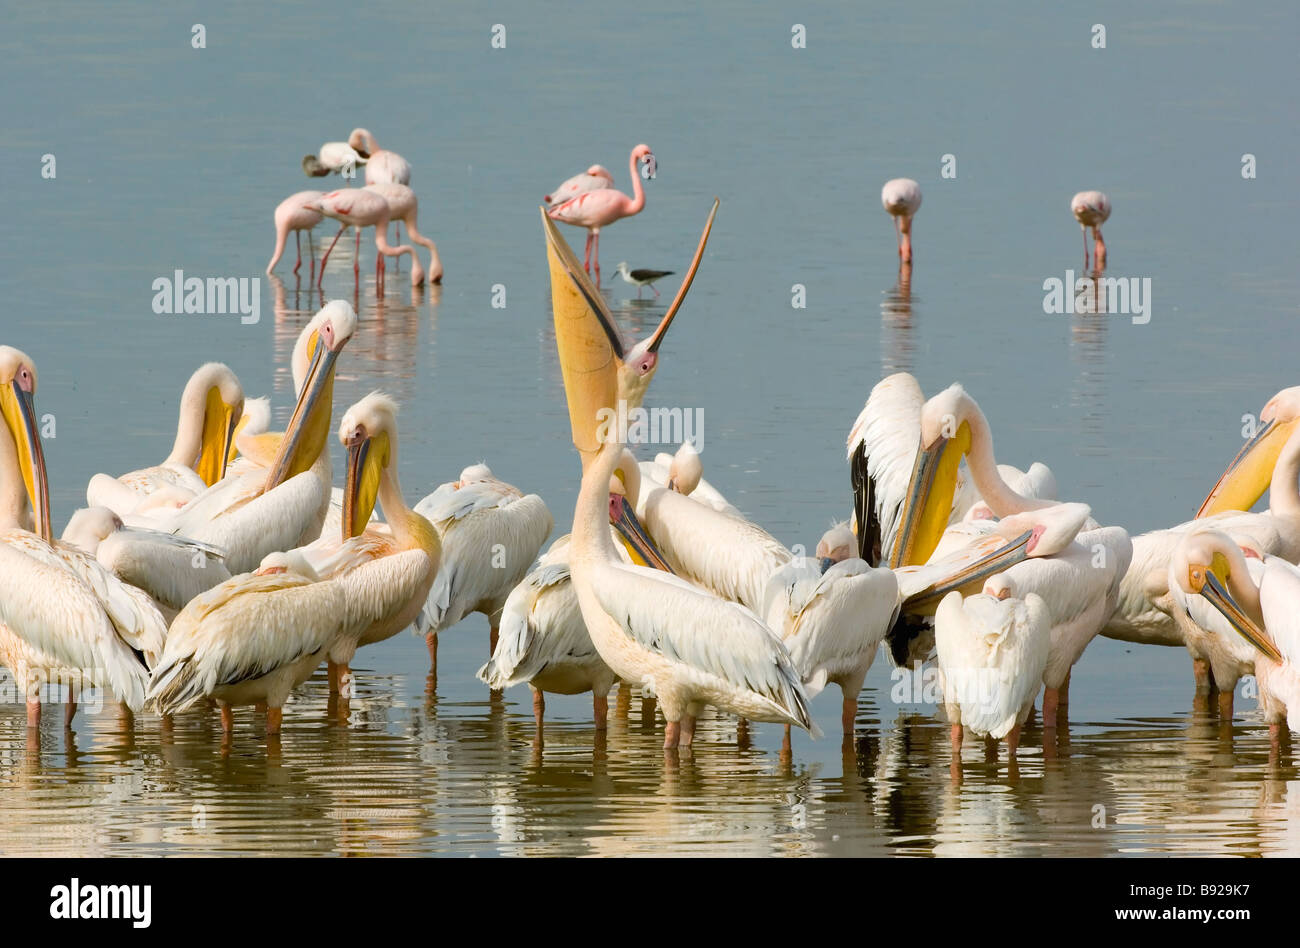 Pelicans Pelecanidae rest and groom themselves after feeding in a pan Amboseli National Park Kenya Stock Photo